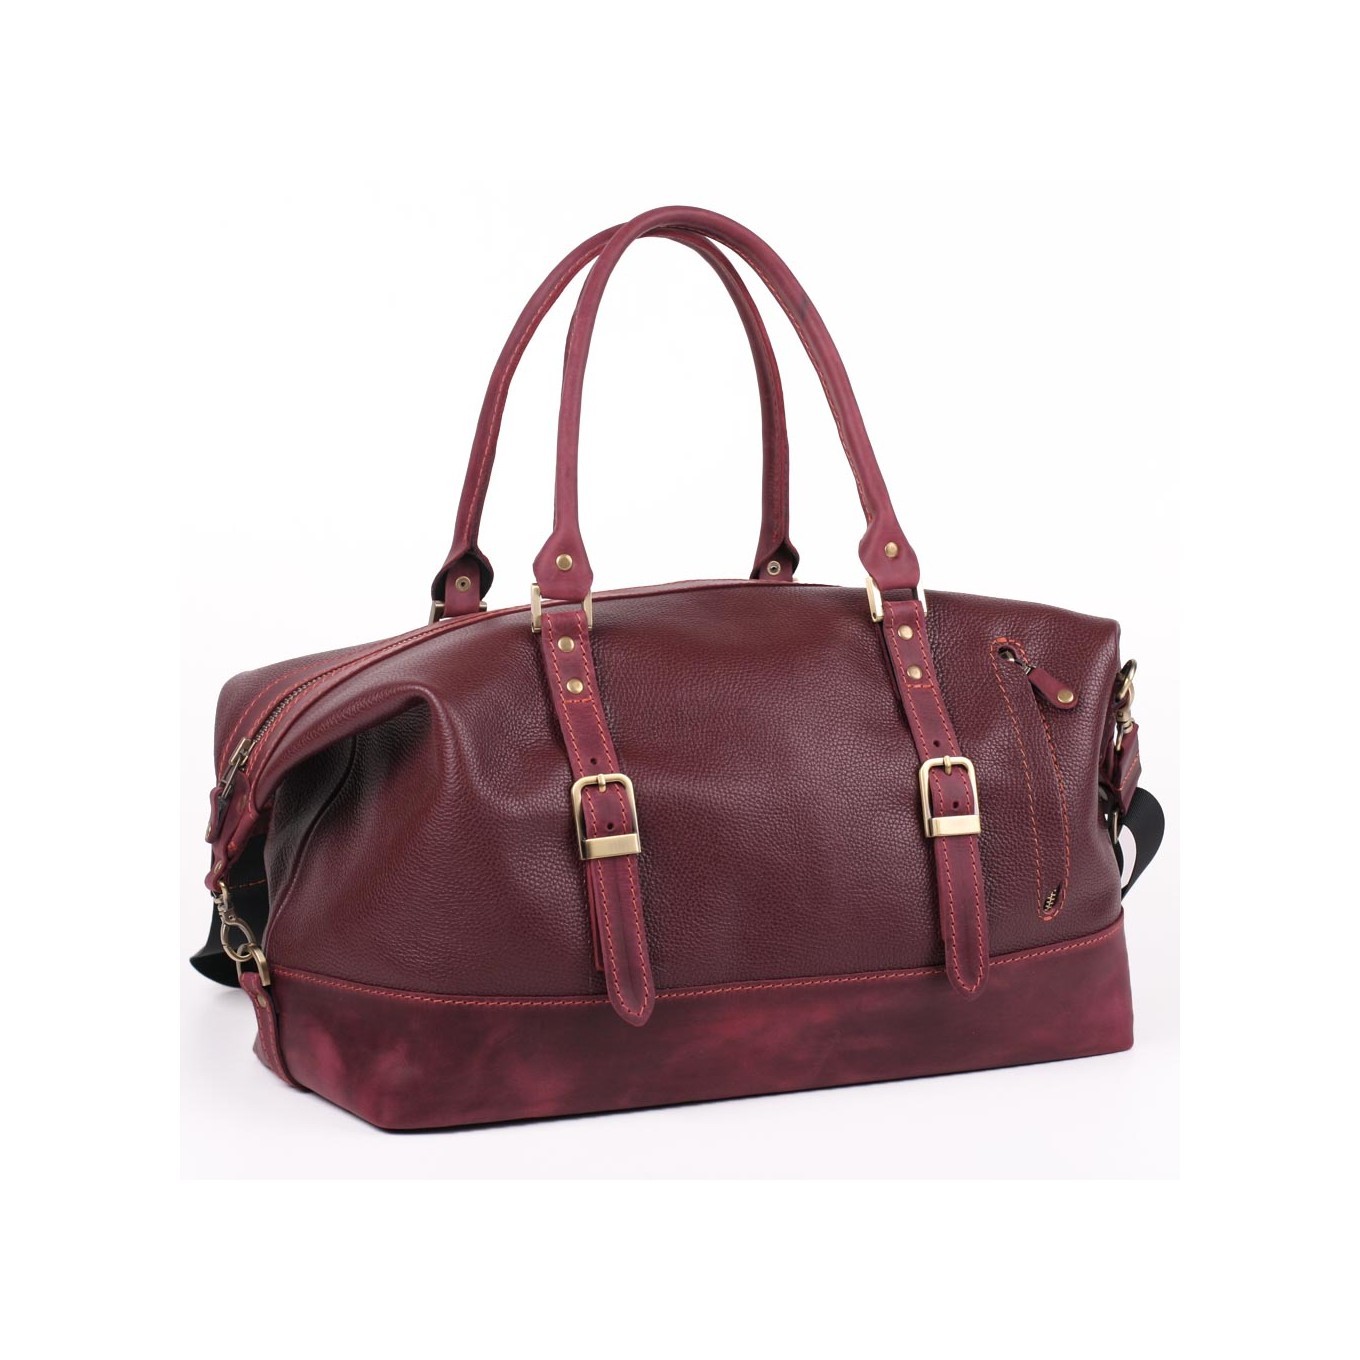 Beautiful women's leather carpetbag in burgundy color